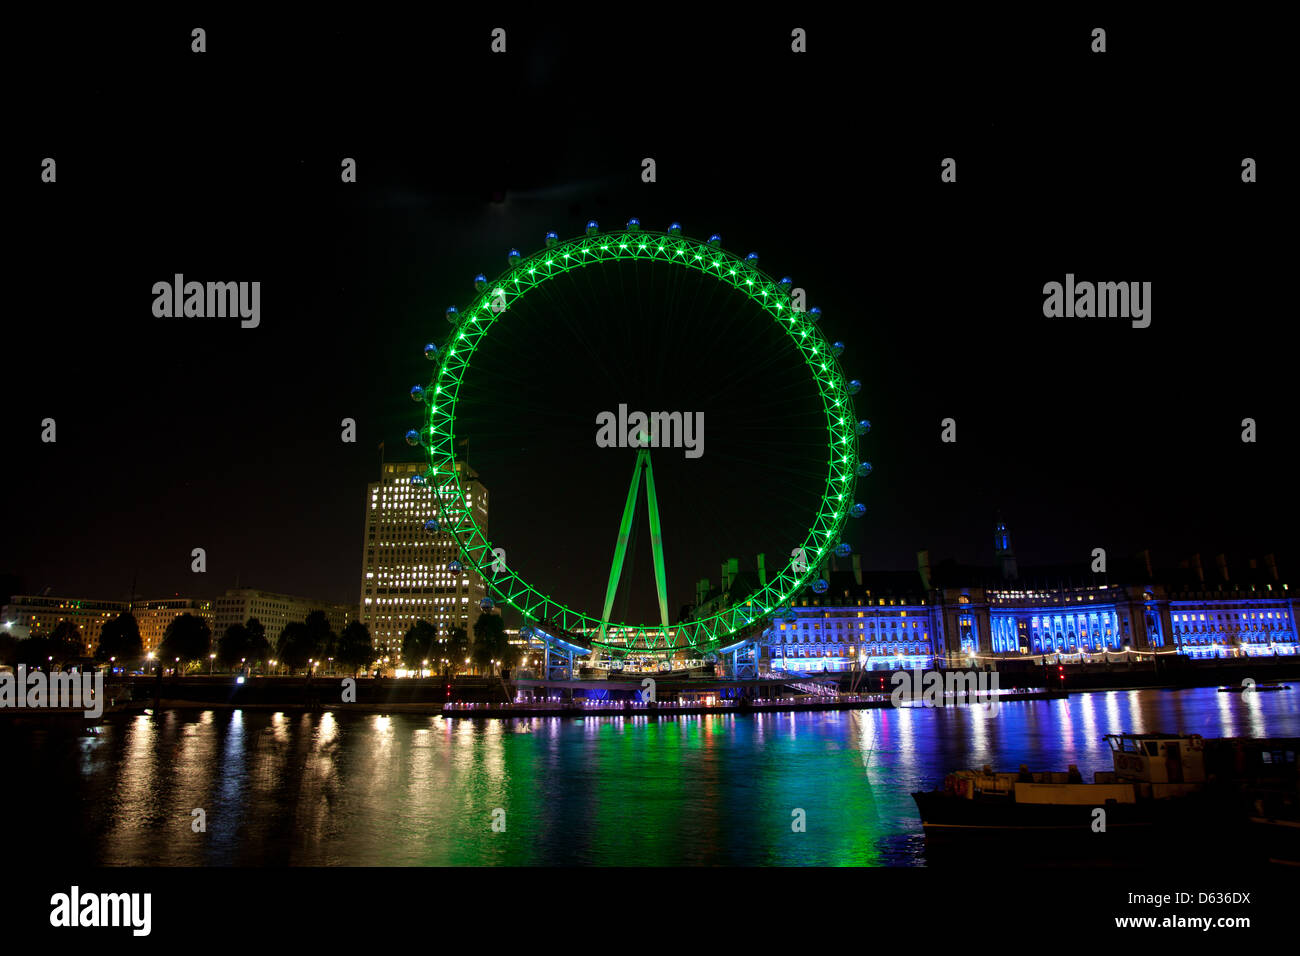 London eye is lit up in green lights, the lights of the Southbank reflect on the river Thames bellow. Stock Photo